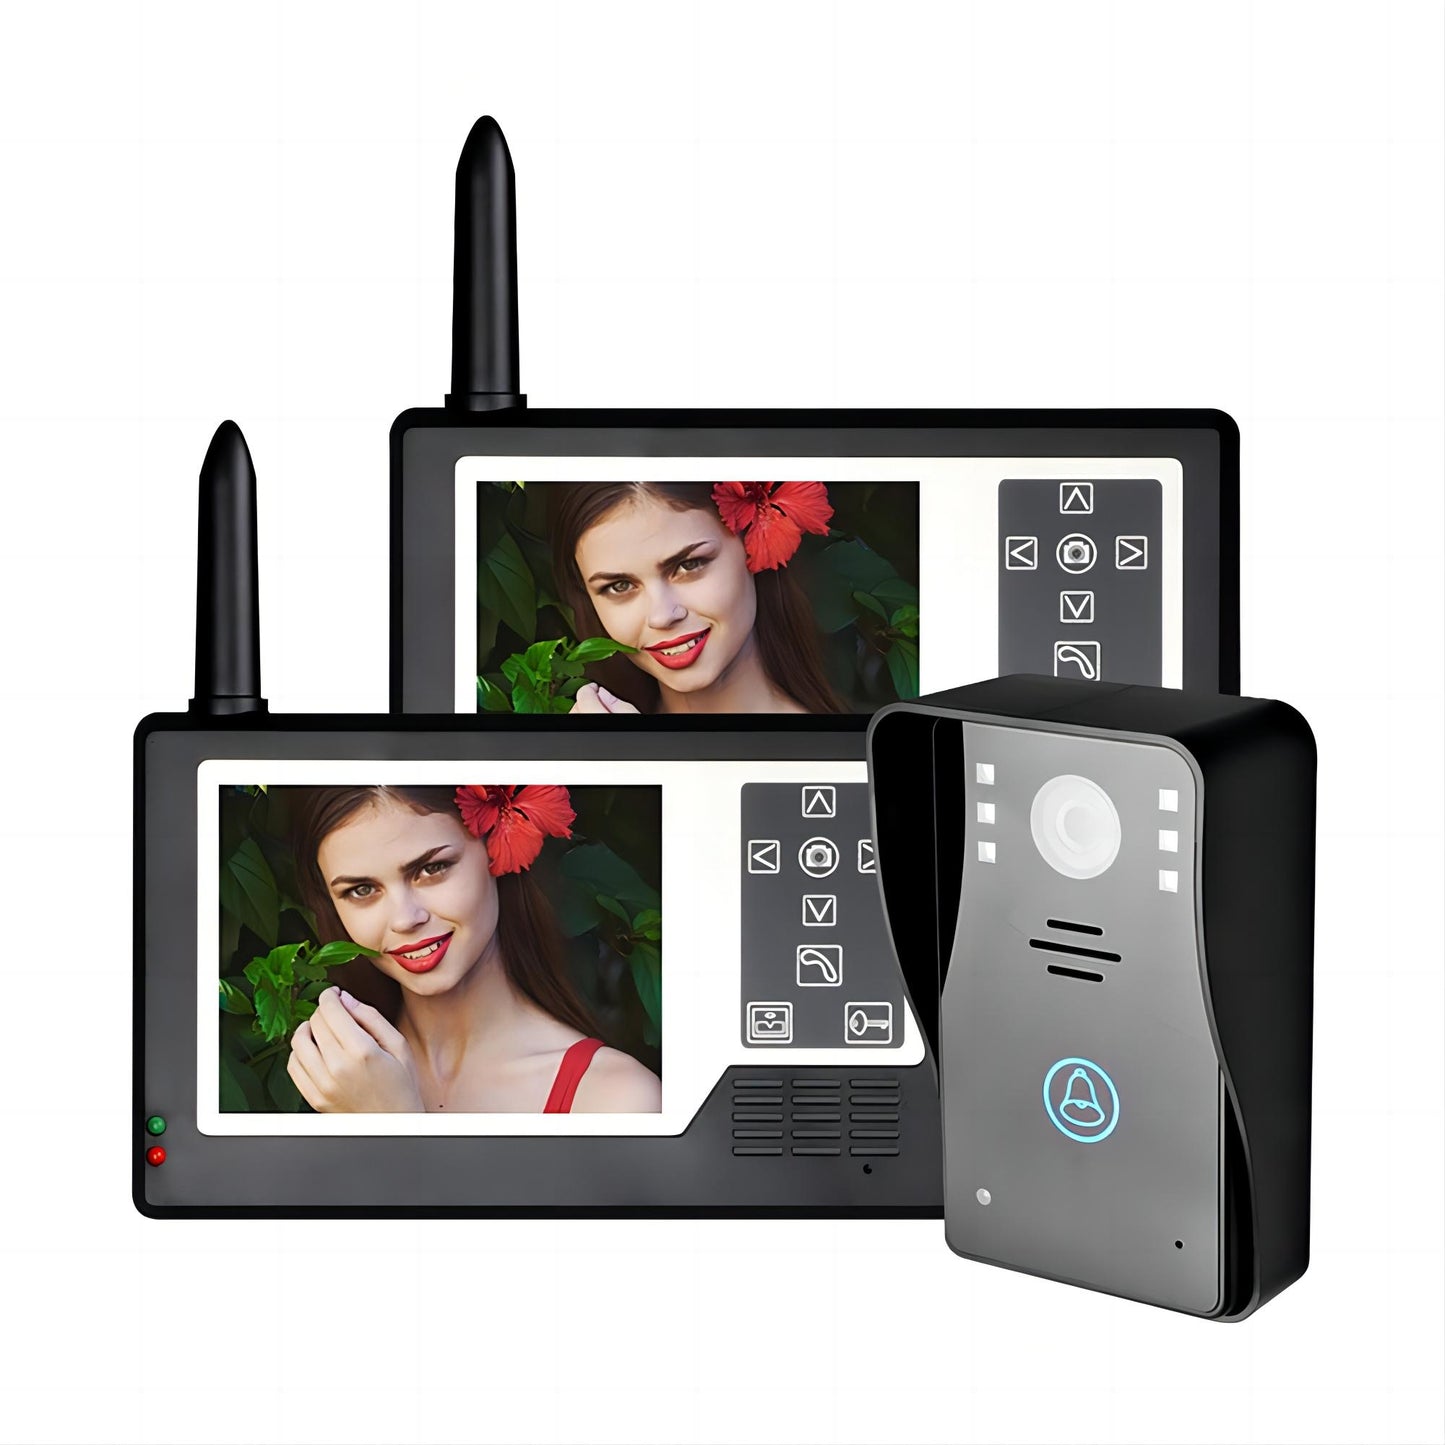 3.5" TFT Color Display  Wireless Video Intercom System with 2 Monitor  Remote Control Unlock Night Vision for Home Security